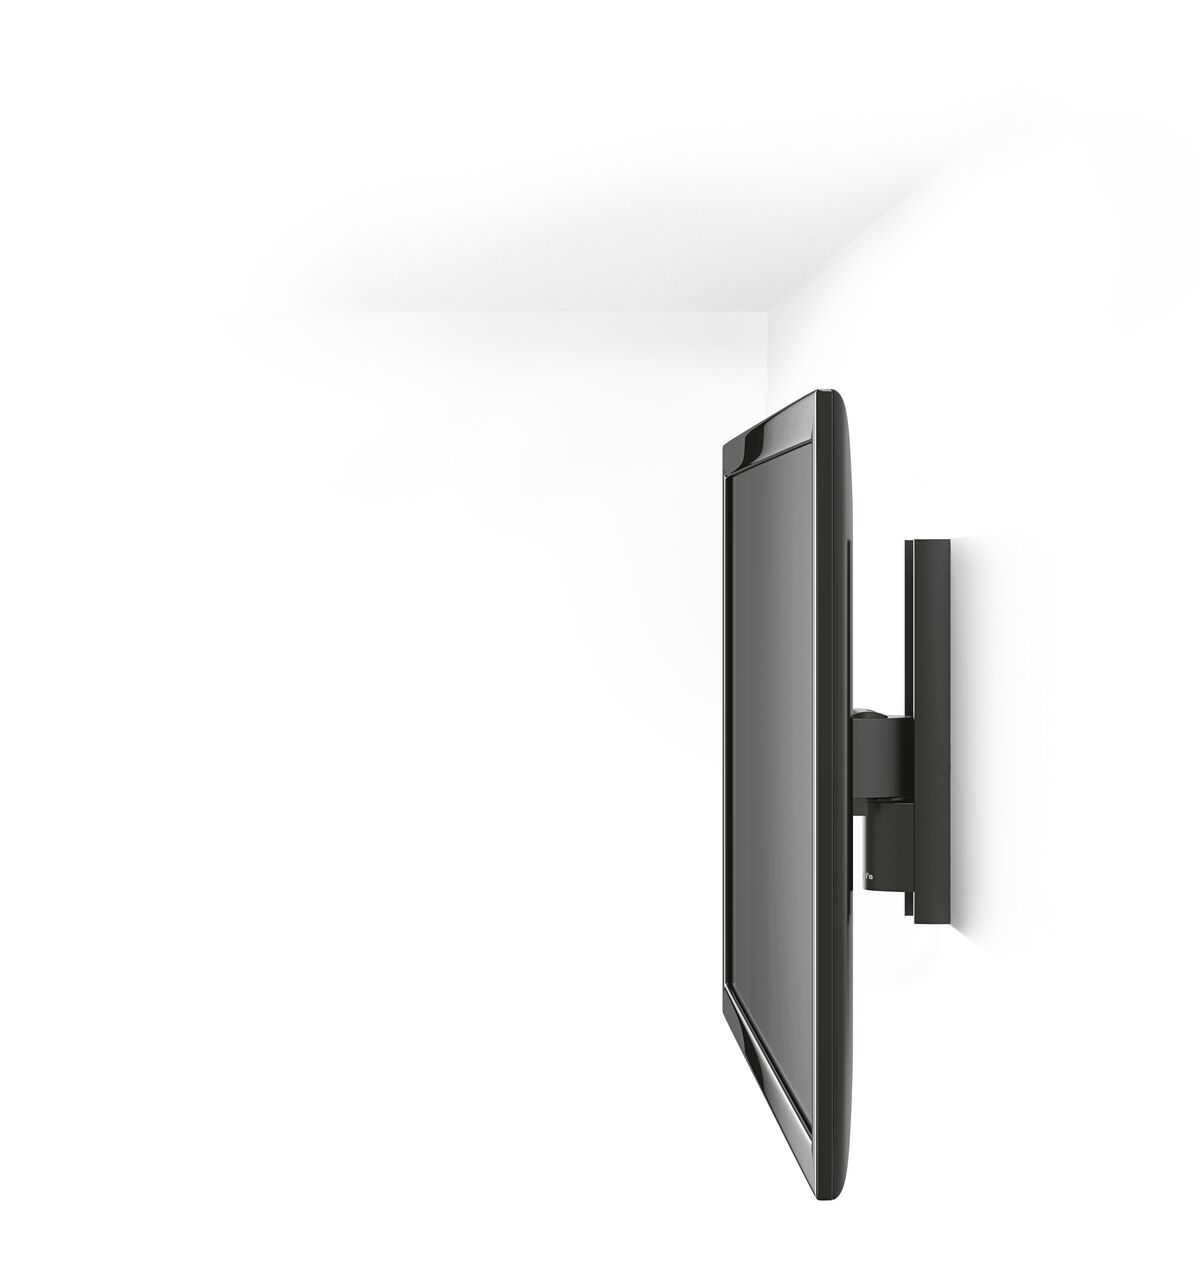 Vogel's WALL 1120 Full-Motion TV Wall Mount - Suitable for 19 up to 37 inch TVs - Limited motion (up to 60°) - Tilt -10°/+10° - Detail